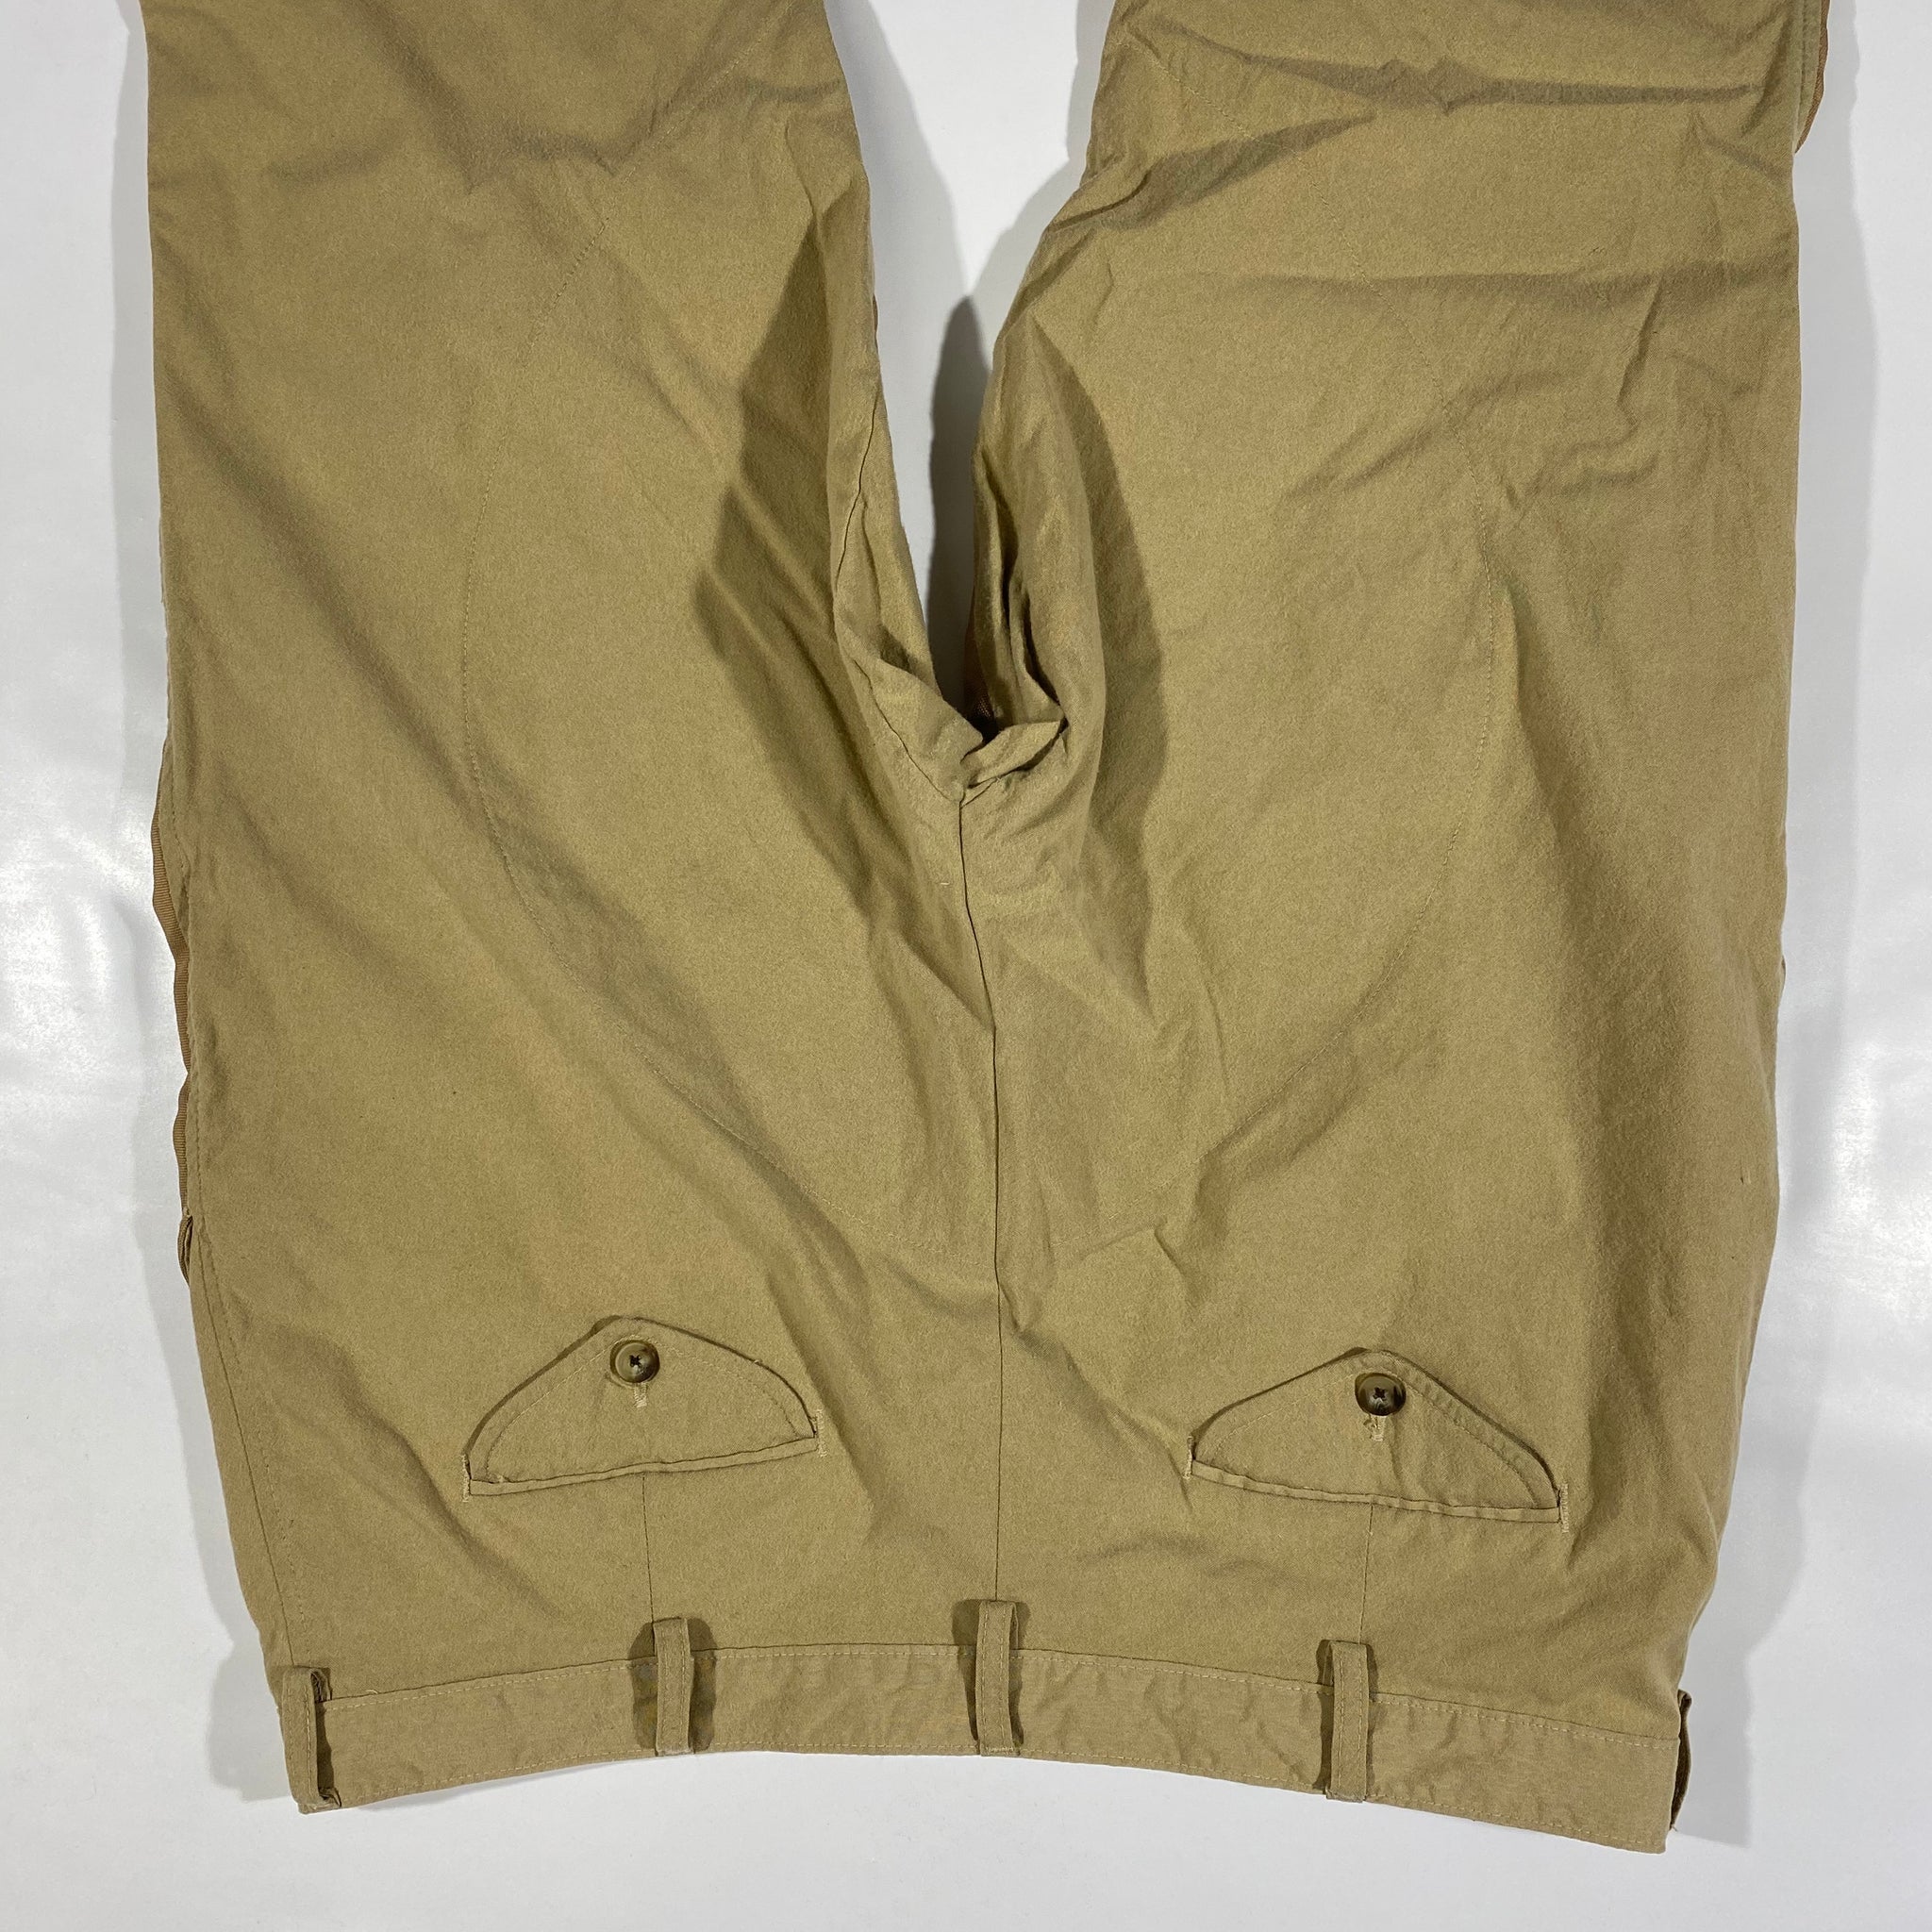 Sold at Auction: VINTAGE L.L. BEAN WOOL HUNTING PANTS SIZE 38